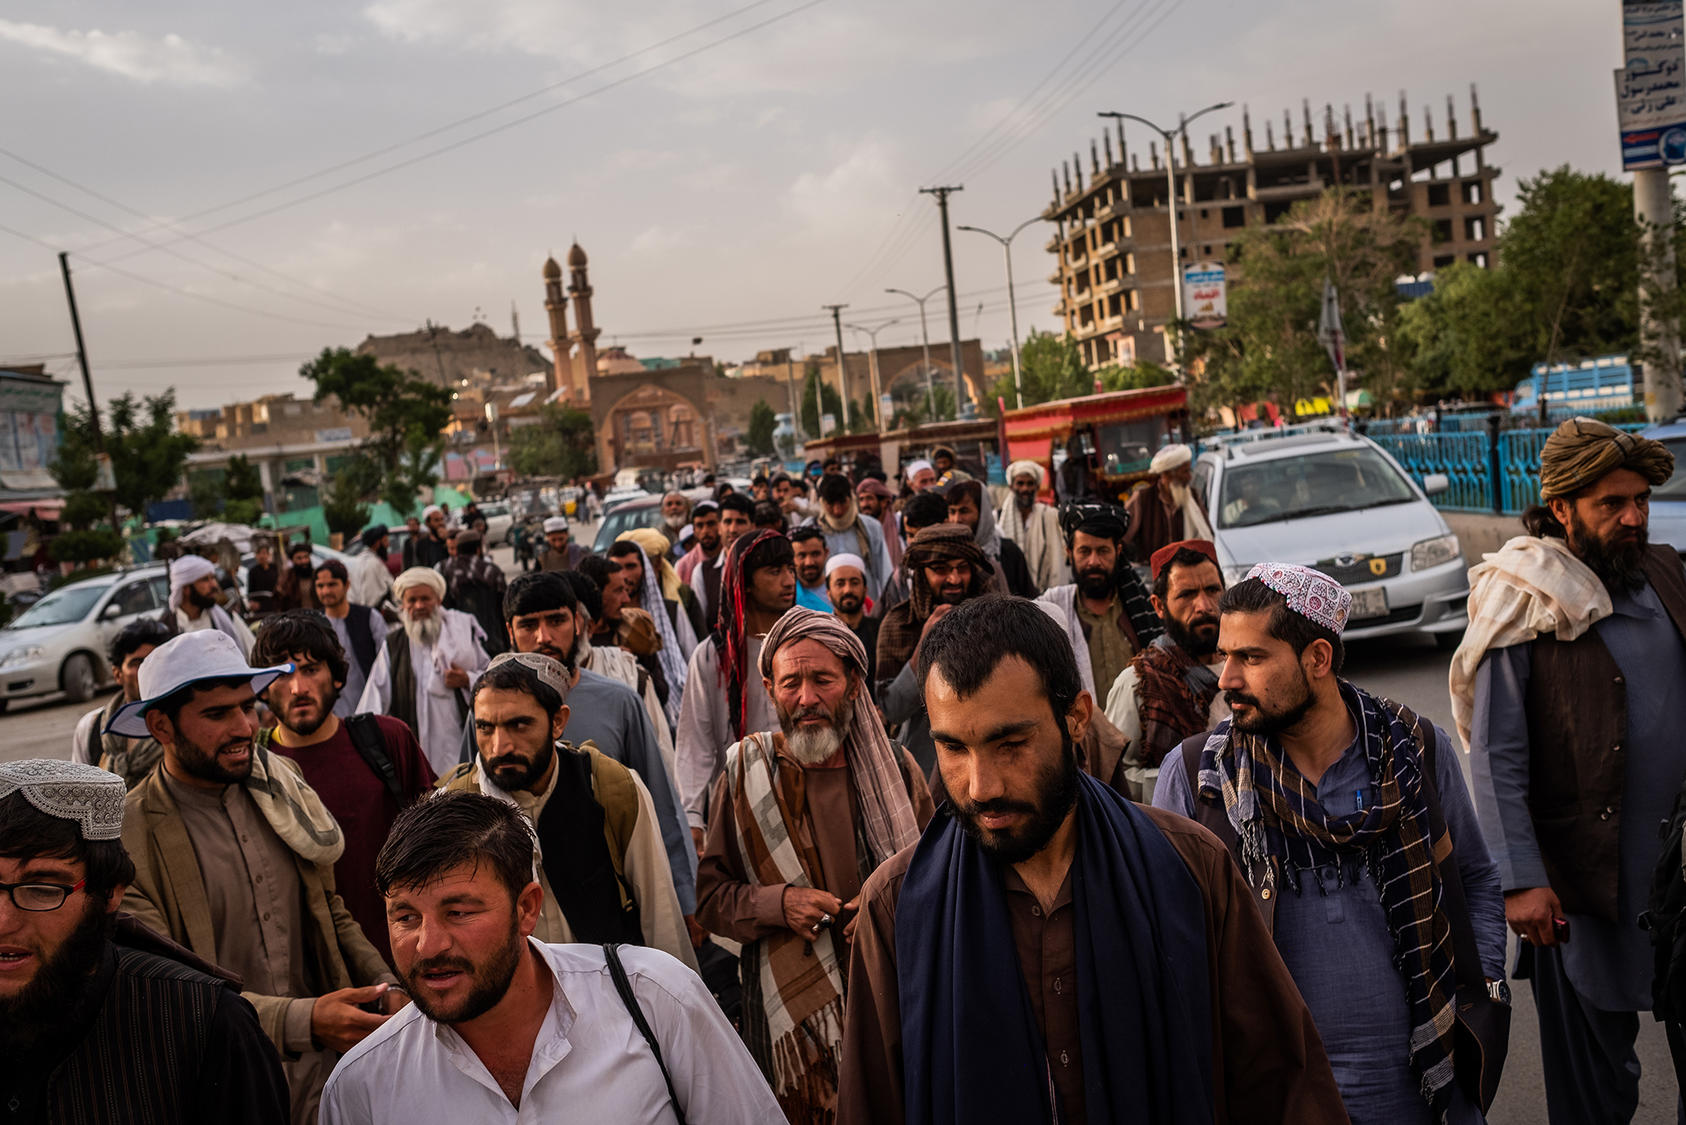 A peace march in Ghazni, June 10, 2018. (Jim Huylebroek/The New York Times)